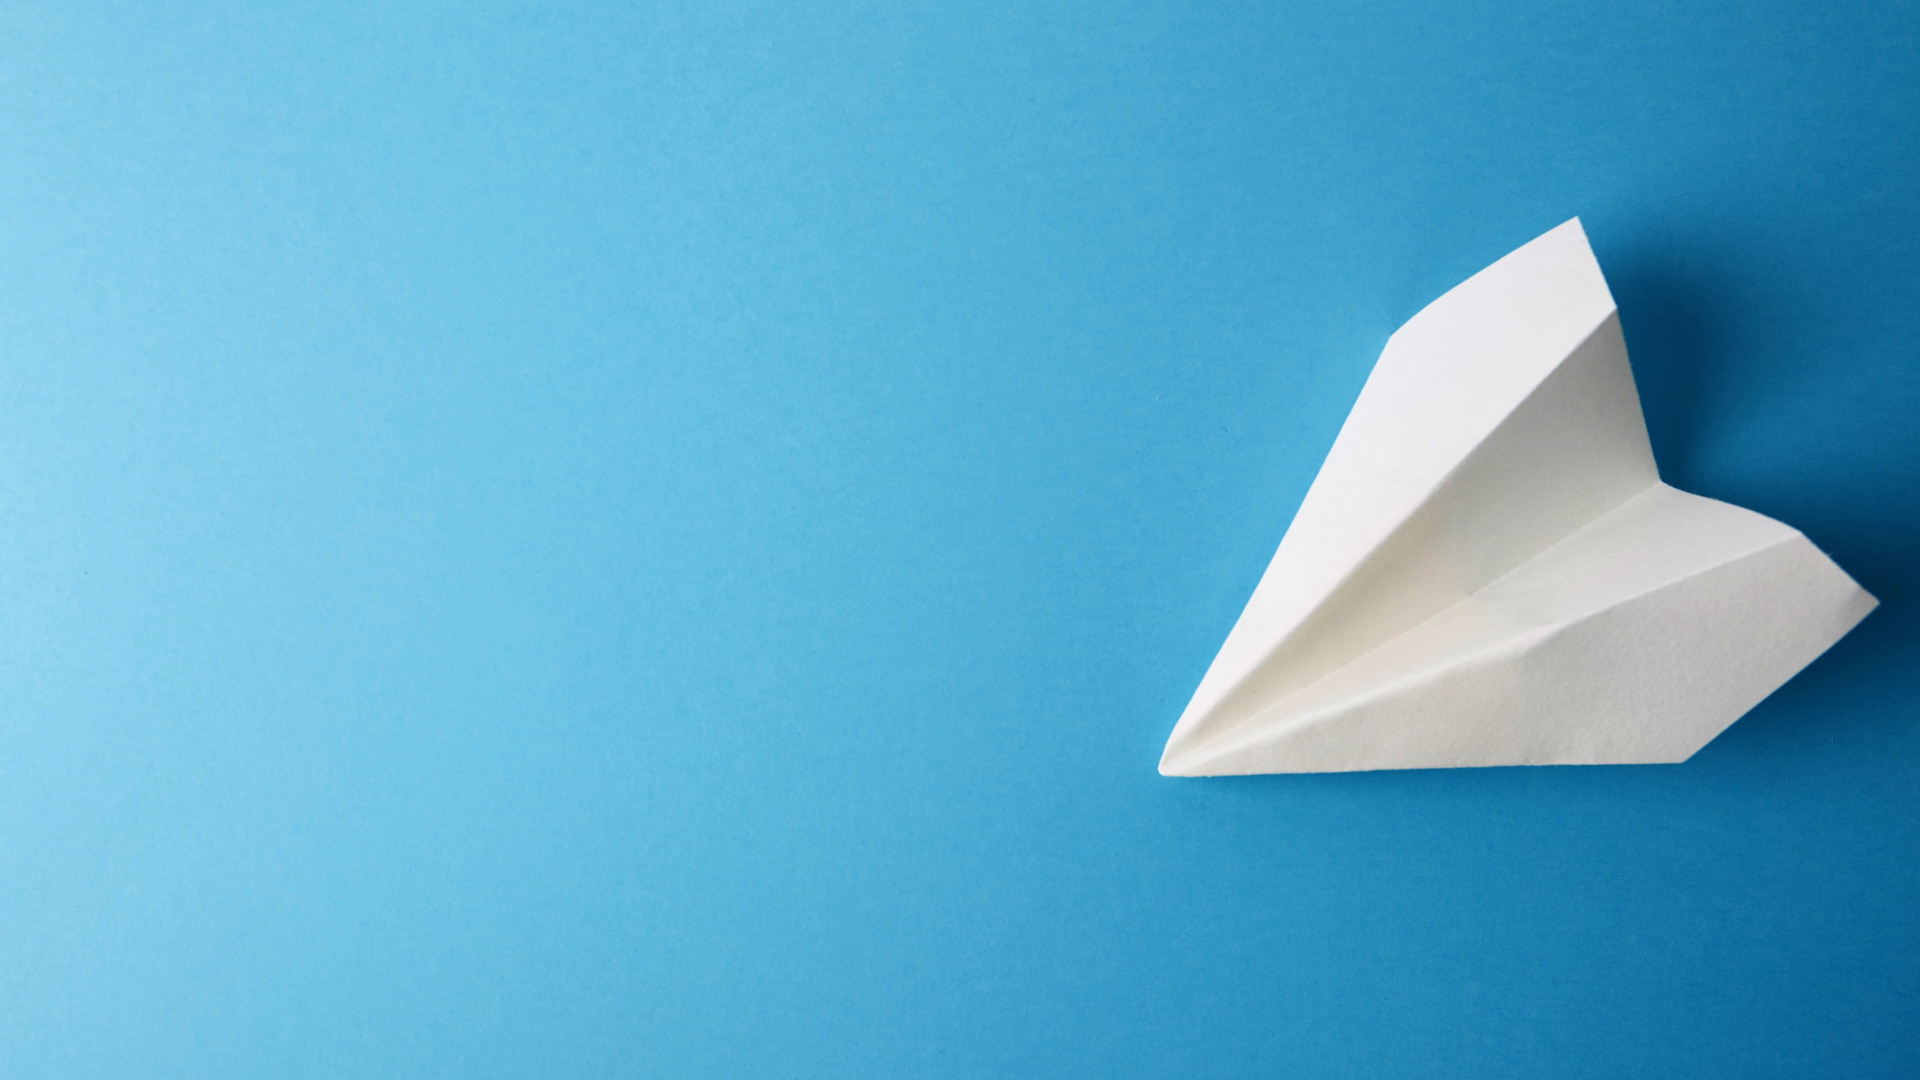 A Paper Airplane On A Blue Background